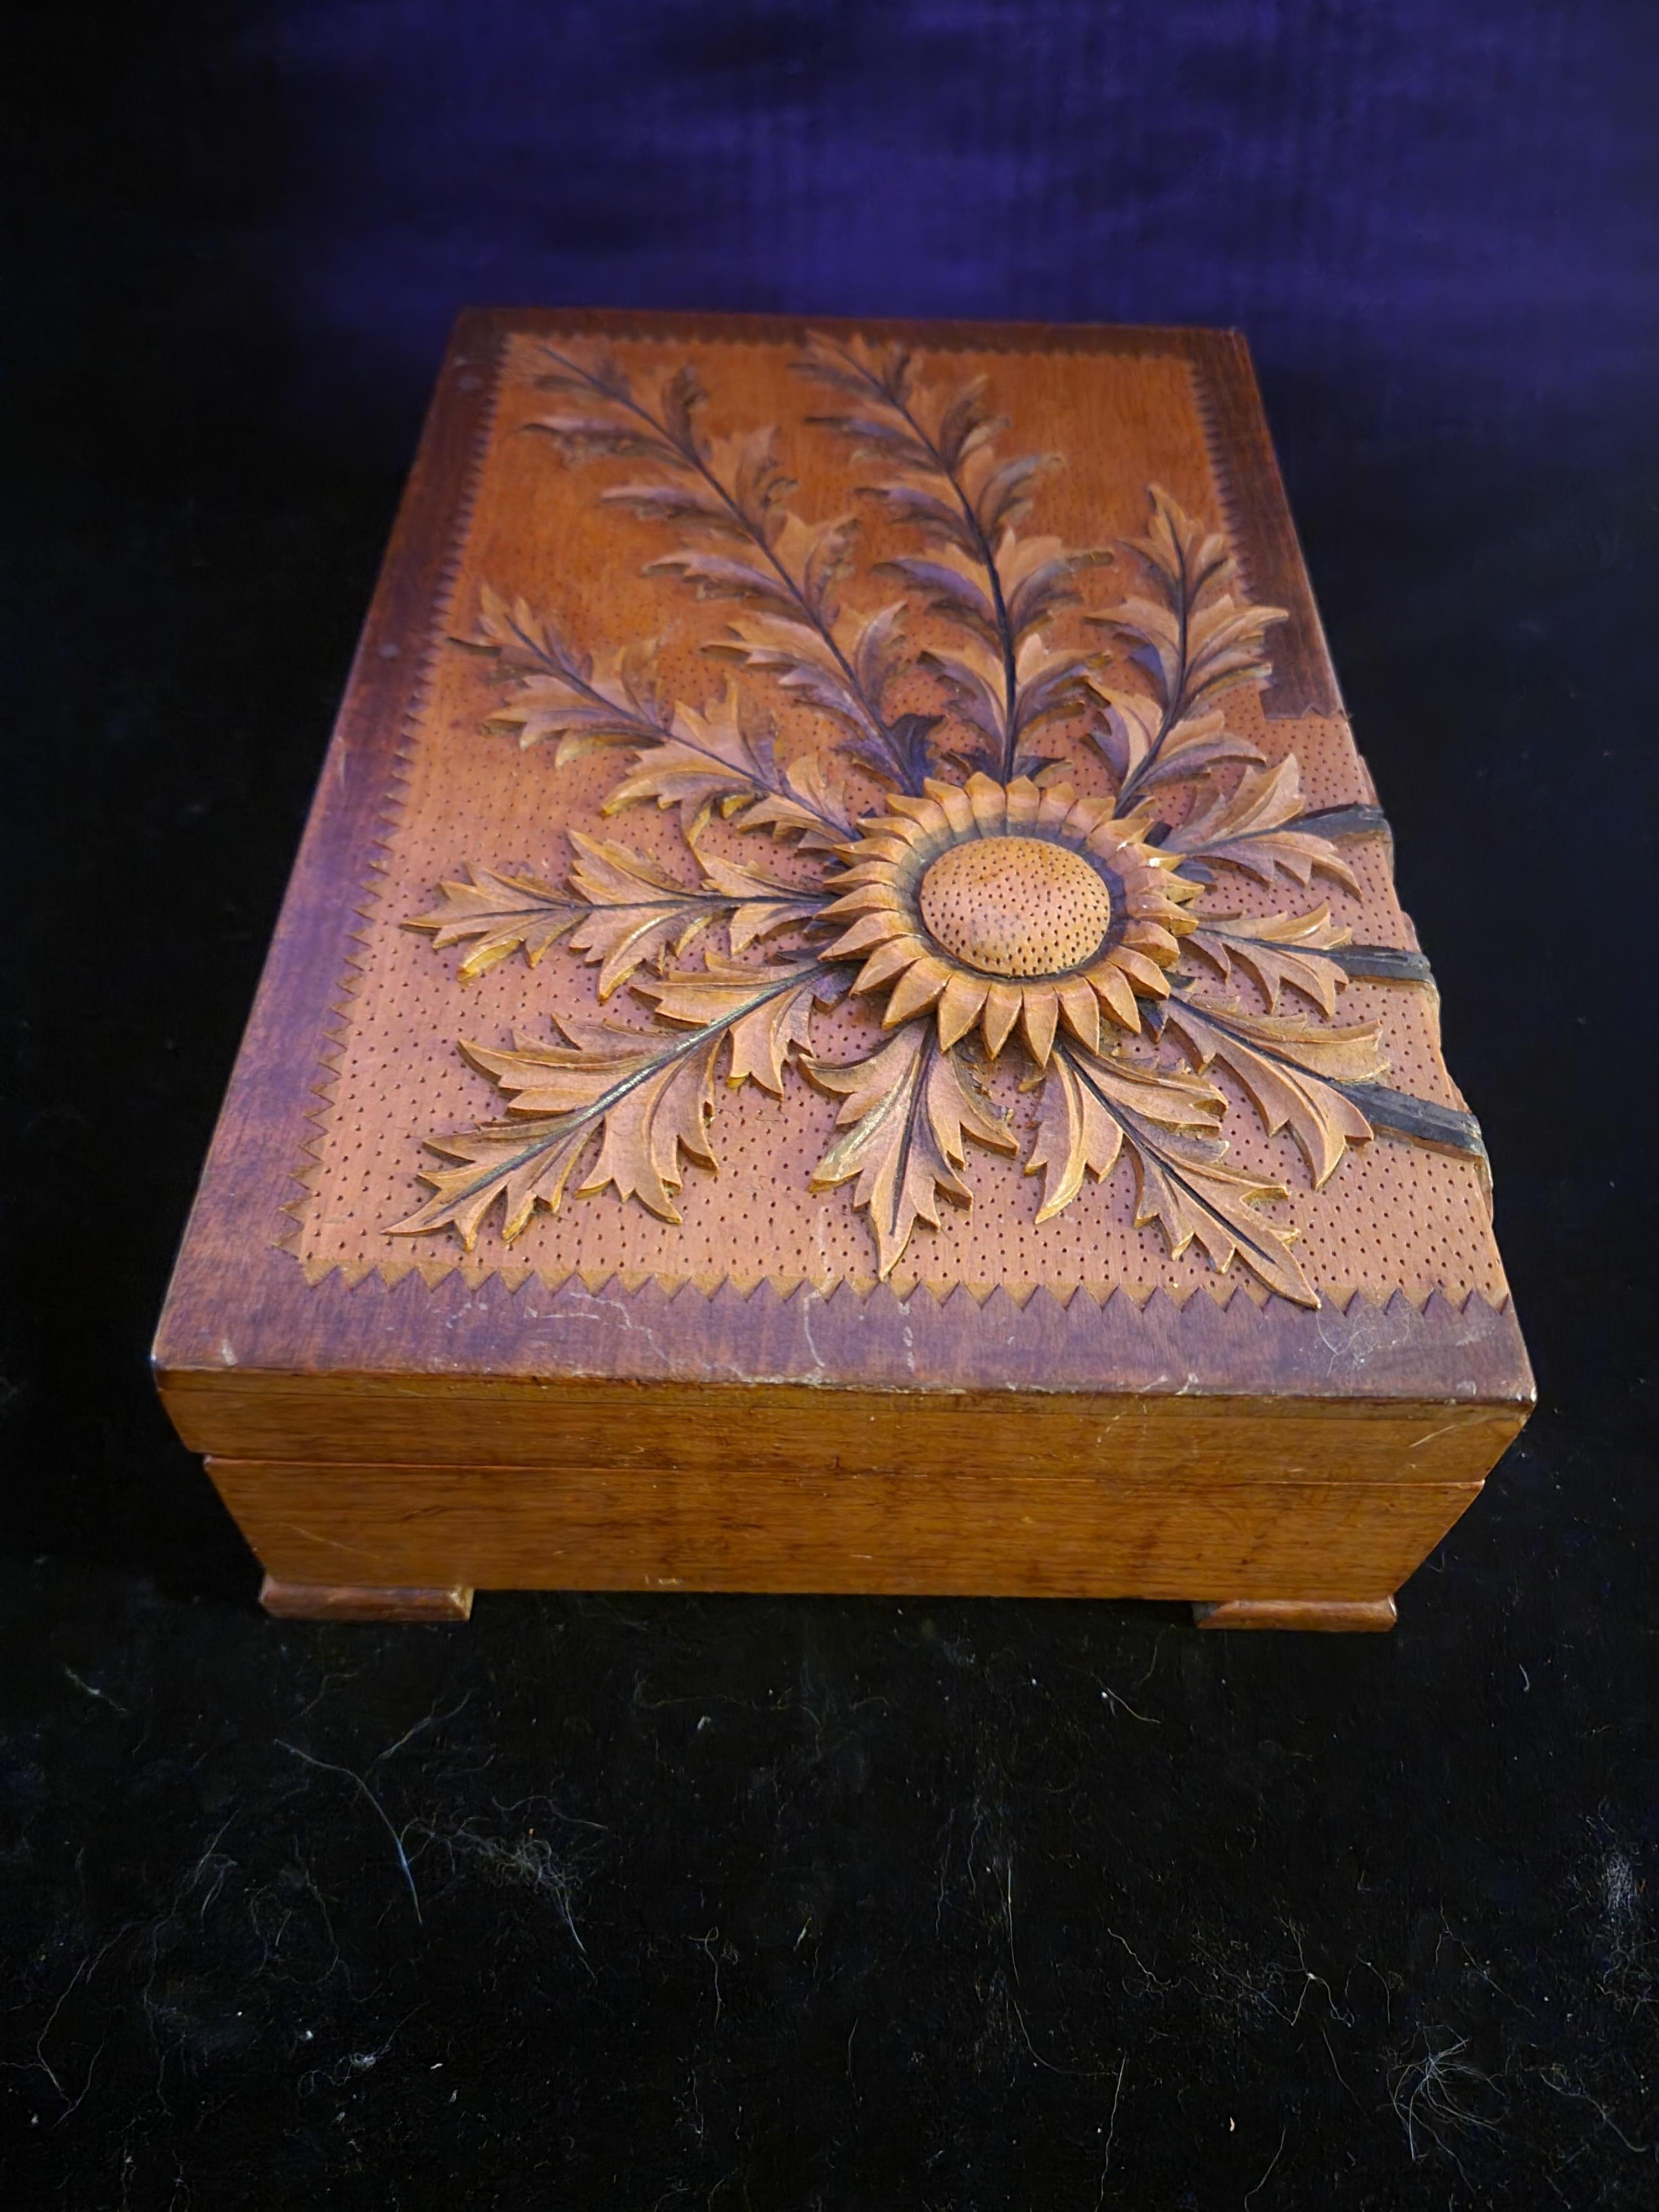 This is one the most exquisitely carved boxes that I have ever been lucky to find. It is a Sunflower letter/jewelry box. I believe to be created in Italy. I do not know for dsure. The attribution is incorrect because it forced me to put something.